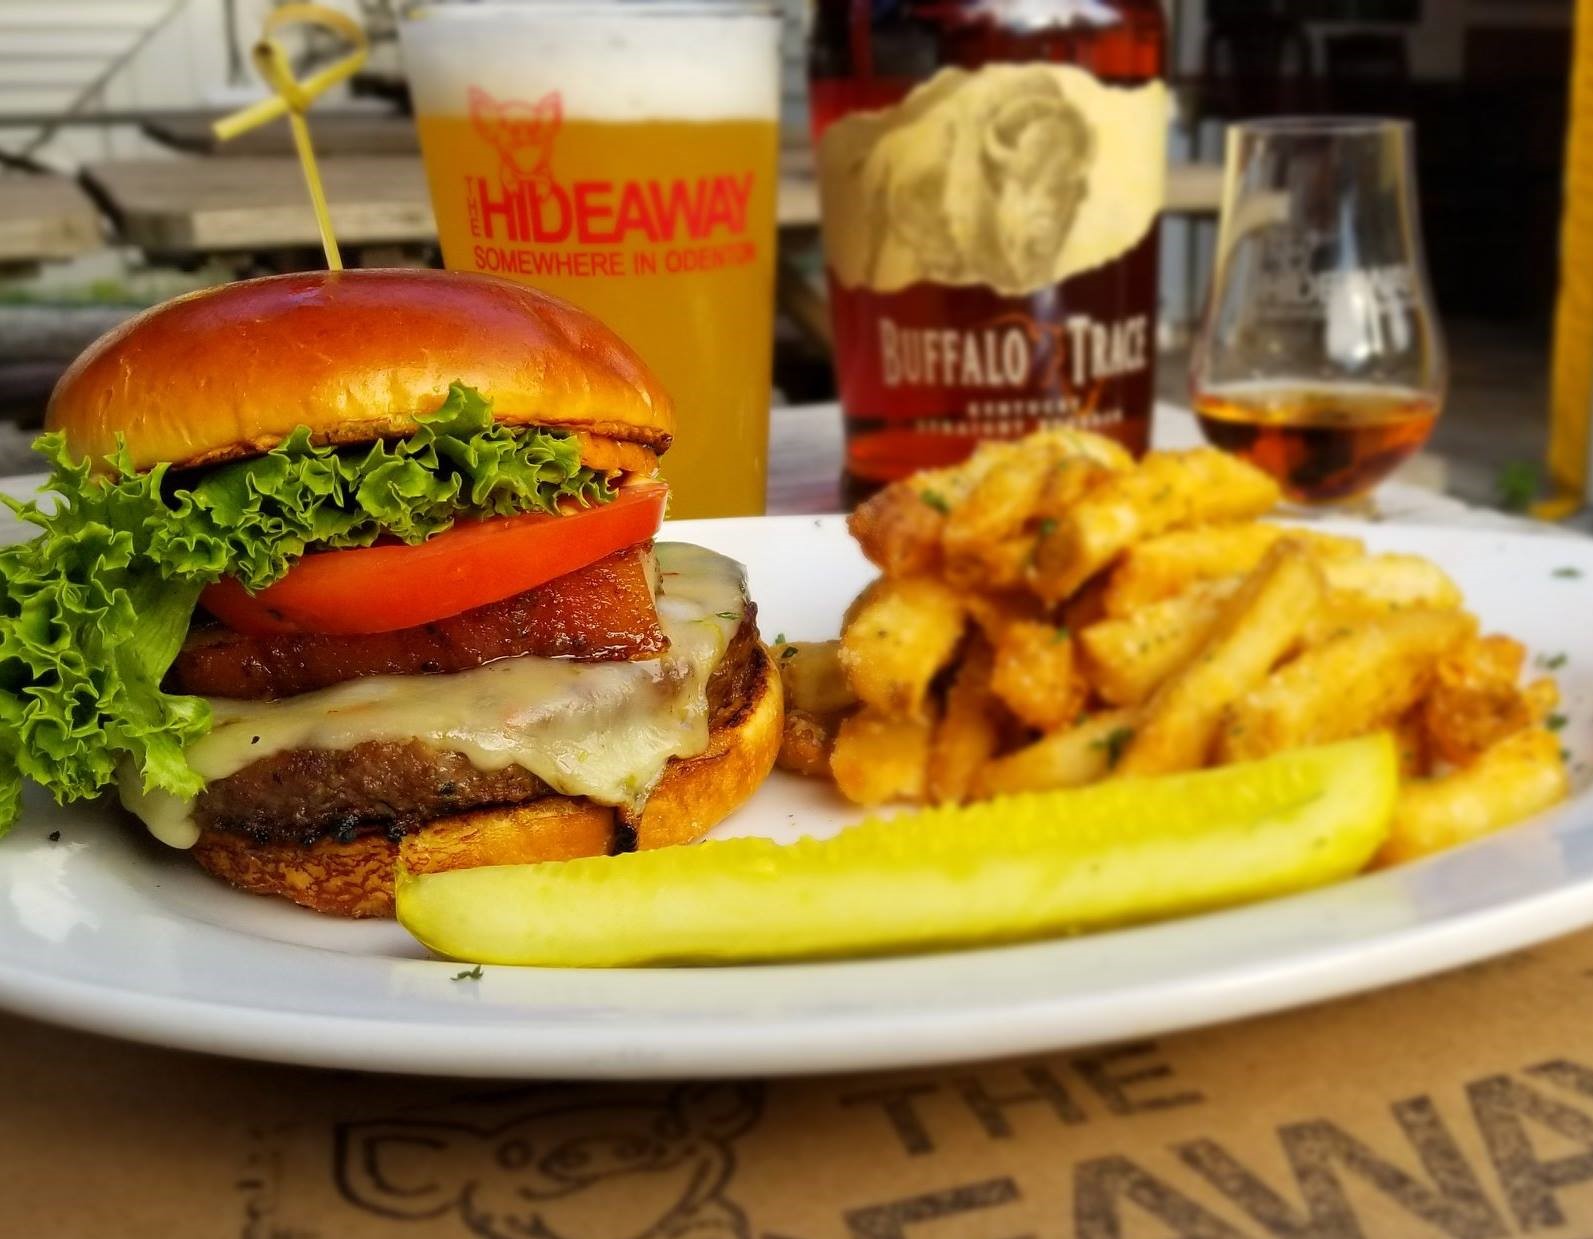 a burger with fries, a pickle, and a glass of beer